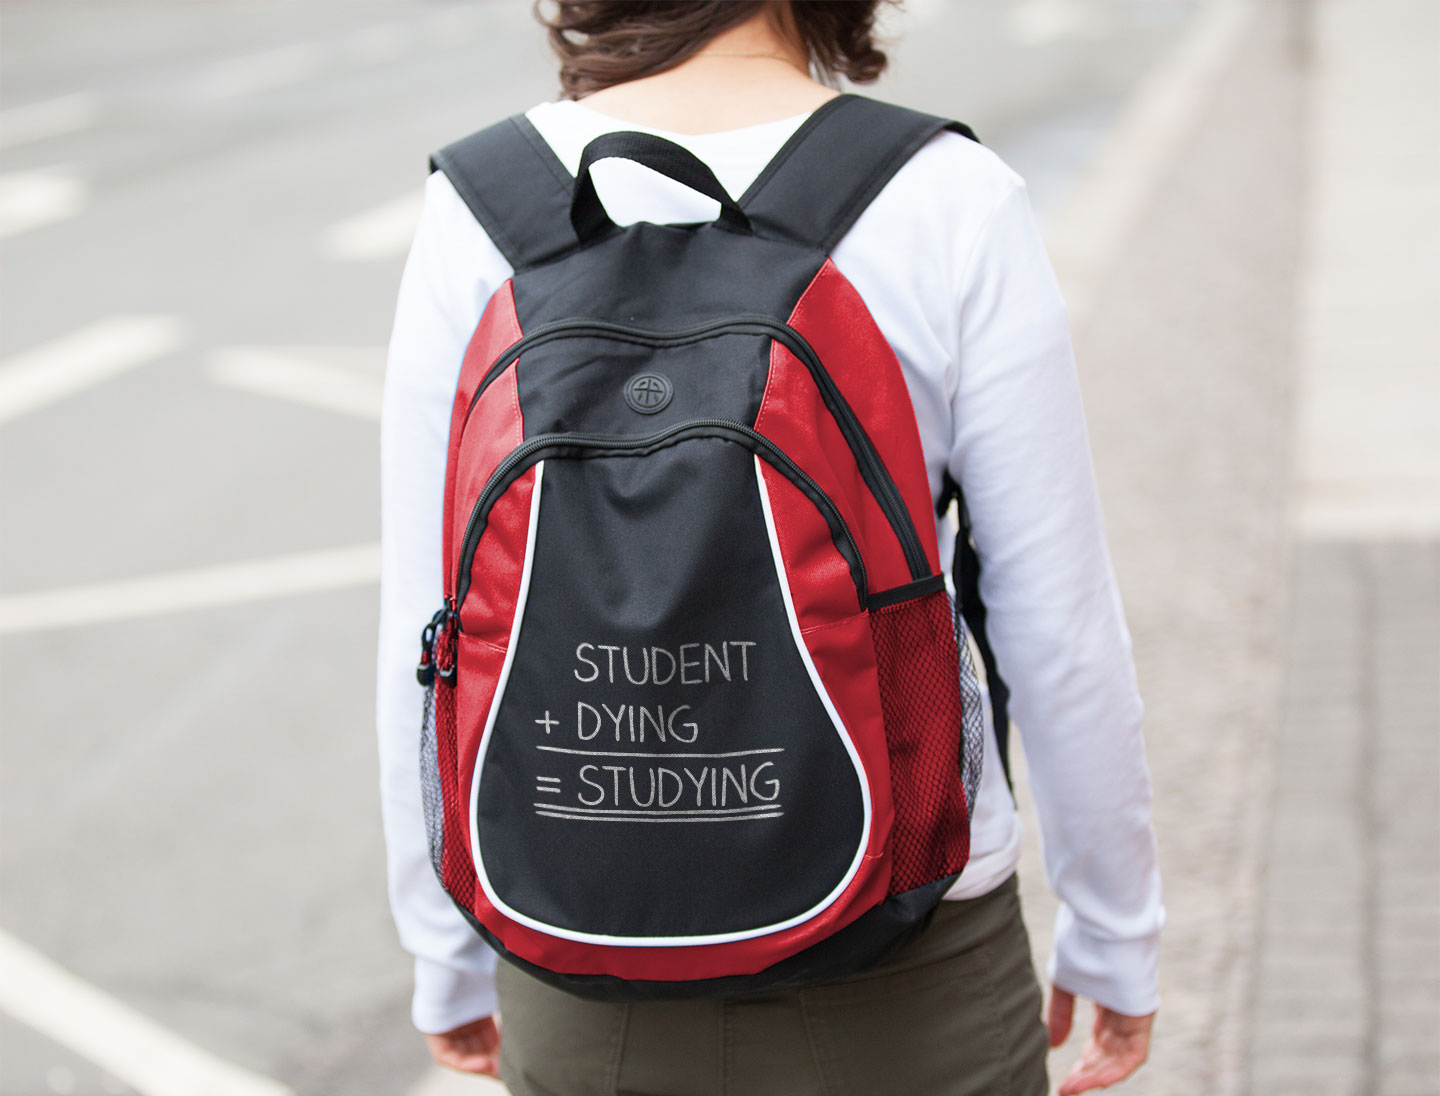 blog_statement-bags_student_02